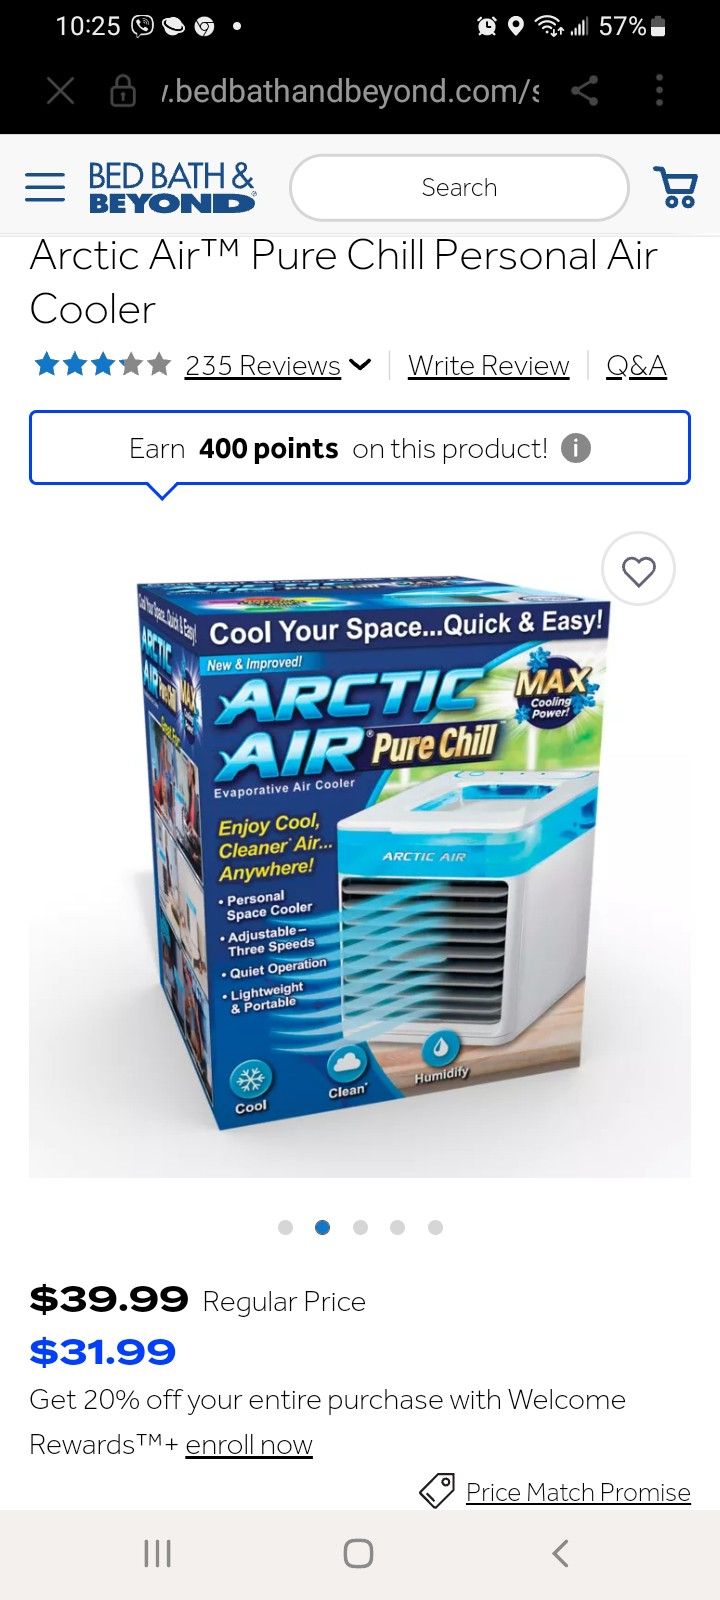 Arctic Air™ Pure Chill Personal Air Cooler

